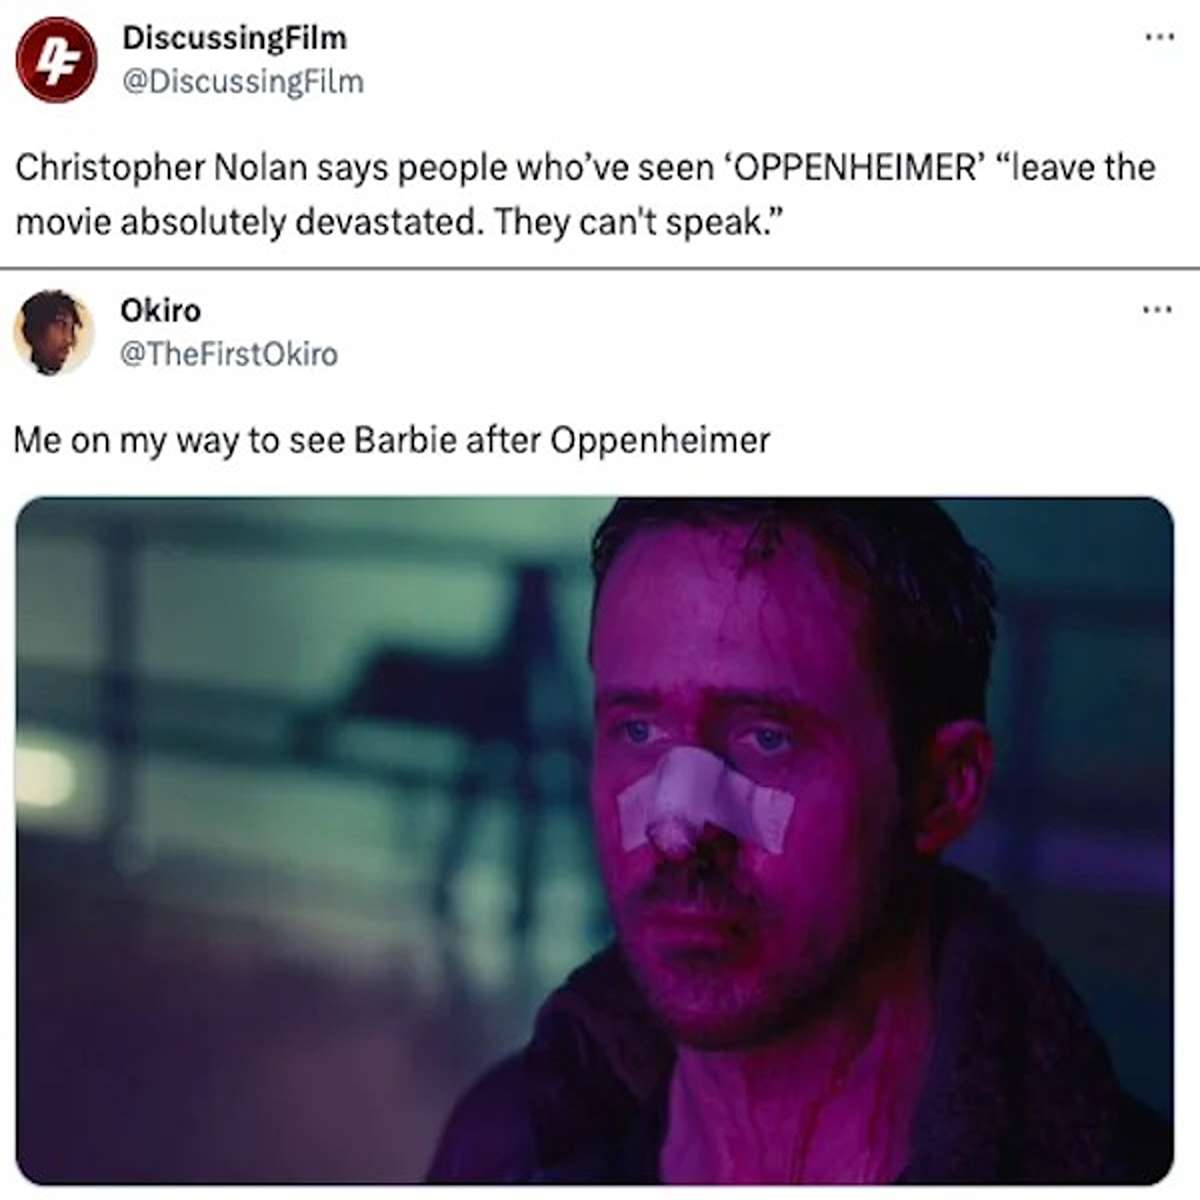 funny tweets and memes - media - 43 DiscussingFilm Christopher Nolan says people who've seen 'Oppenheimer' "leave the movie absolutely devastated. They can't speak." Okiro Me on my way to see Barbie after Oppenheimer